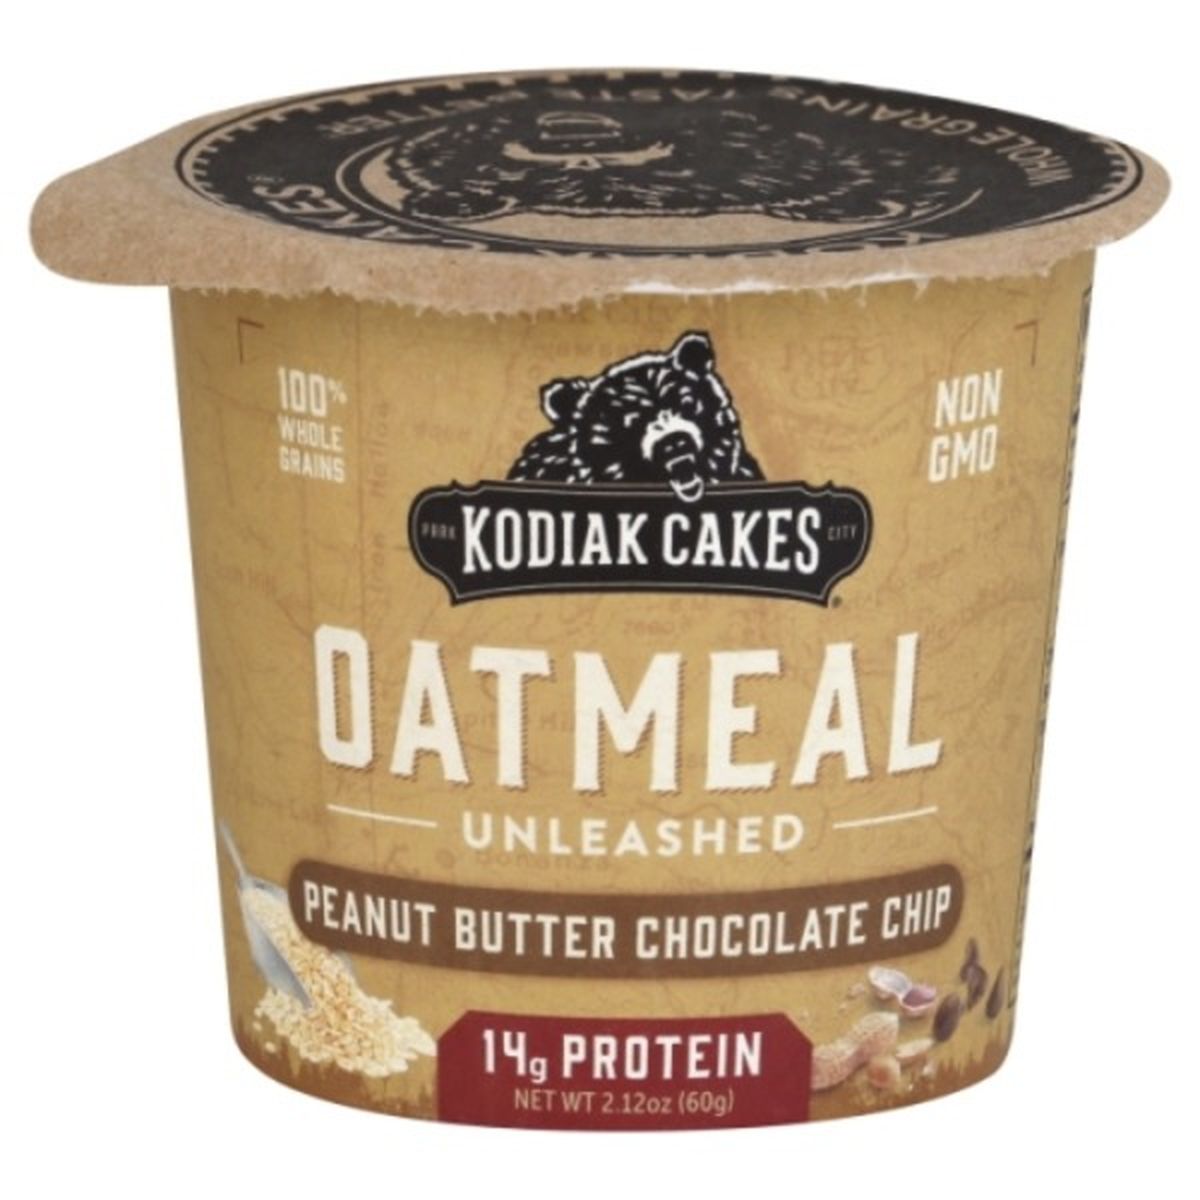 Calories in Kodiak Cakes Oatmeal Unleashed, Peanut Butter Chocolate Chip